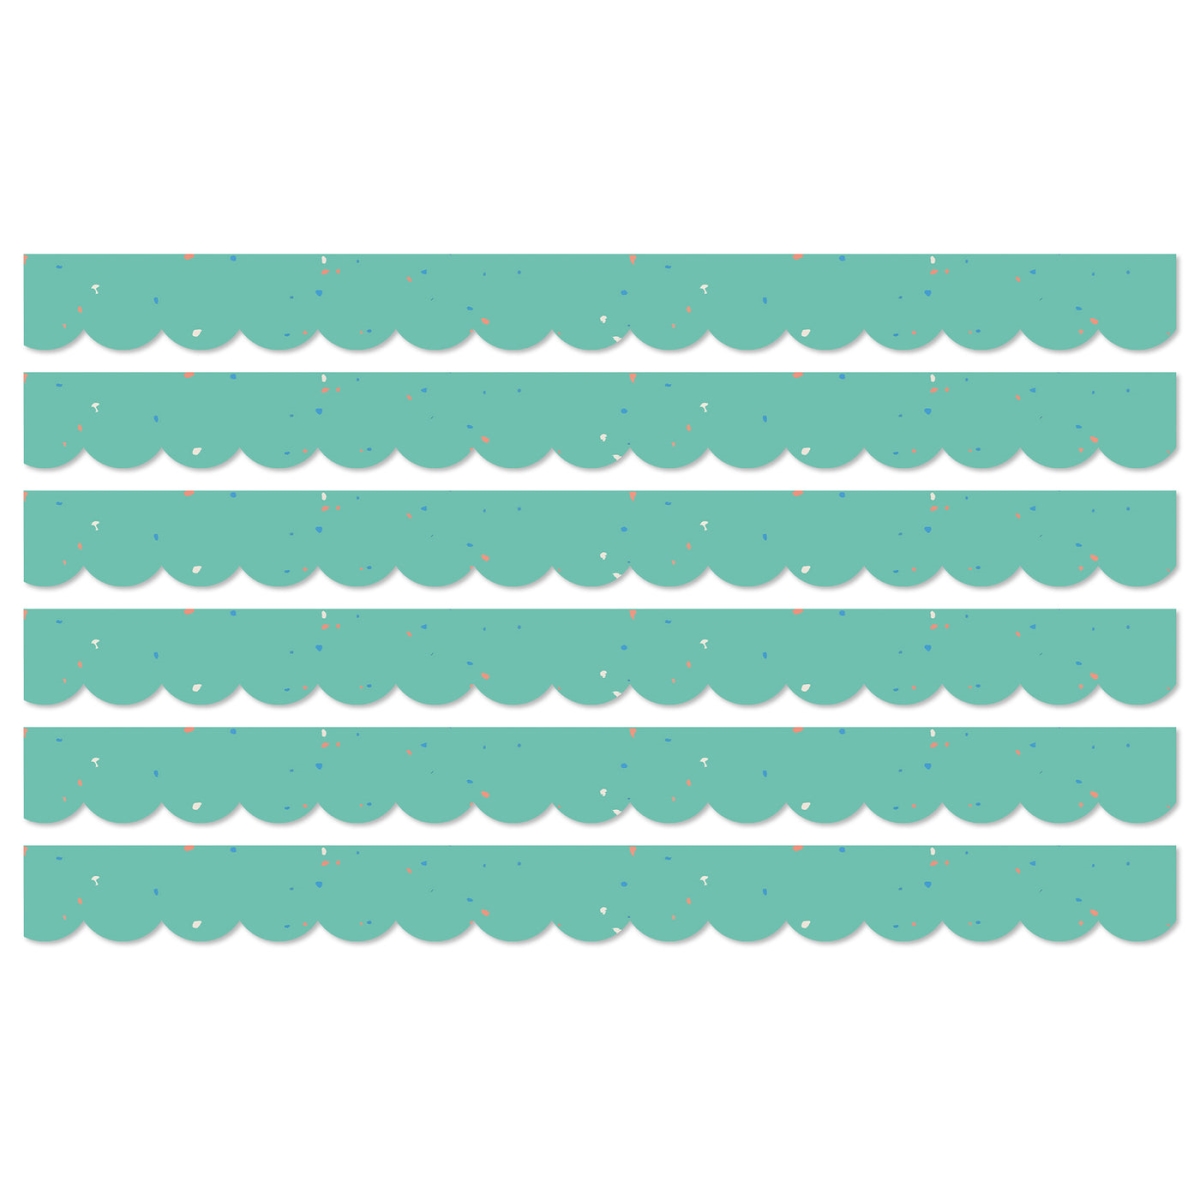 Picture of Carson Dellosa Education CD-108494-6 Speckled Scallop Borders, Teal - Pack of 6